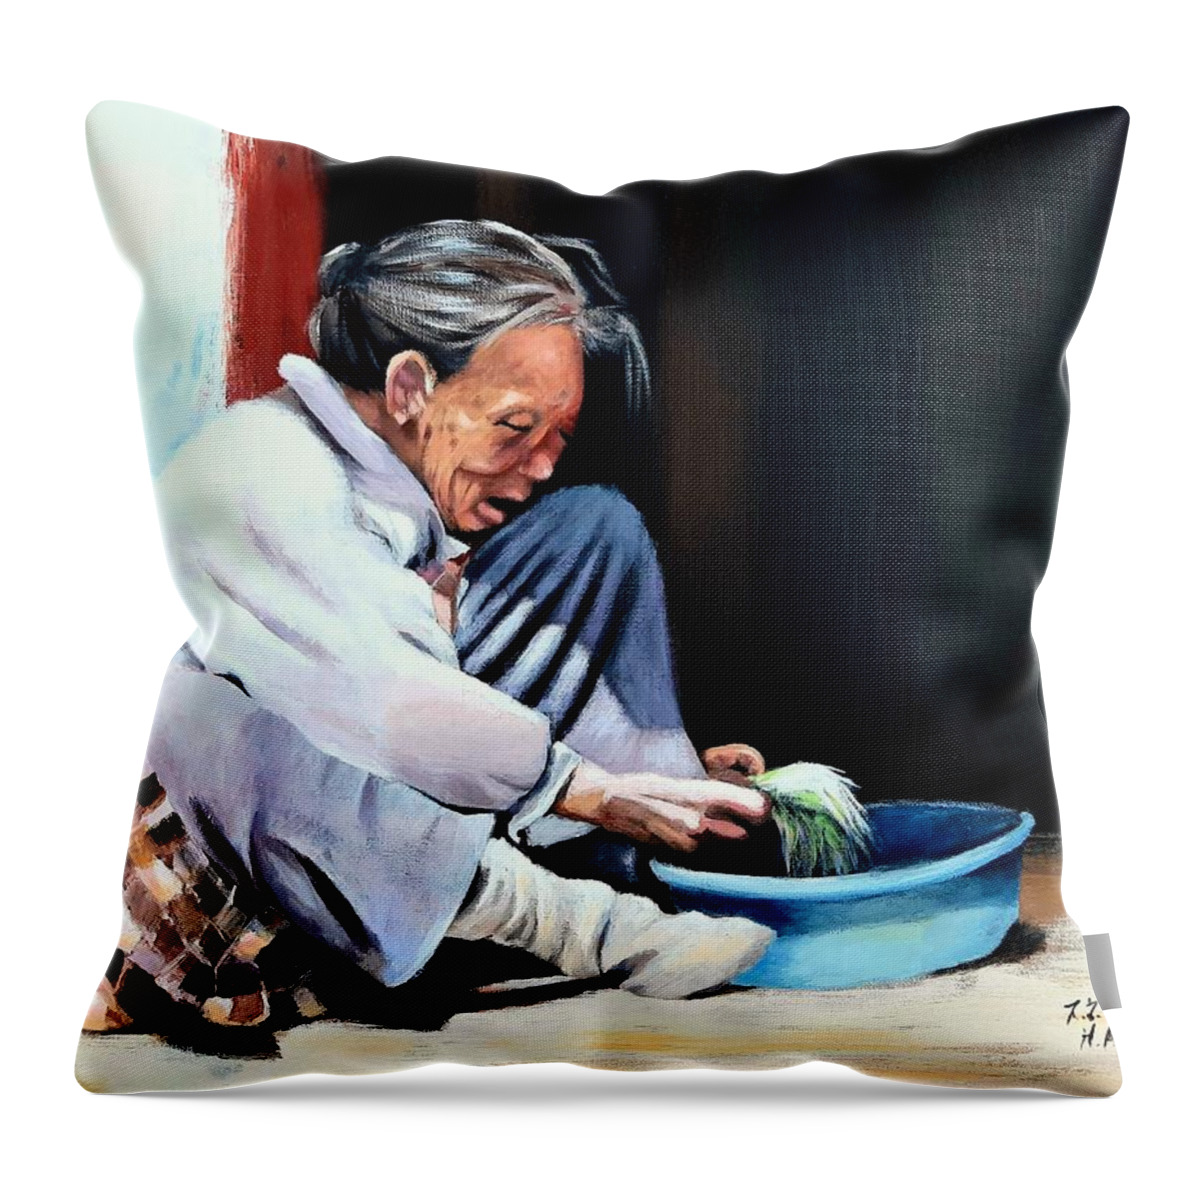 Granny Throw Pillow featuring the painting Remembering Granny by Helian Cornwell